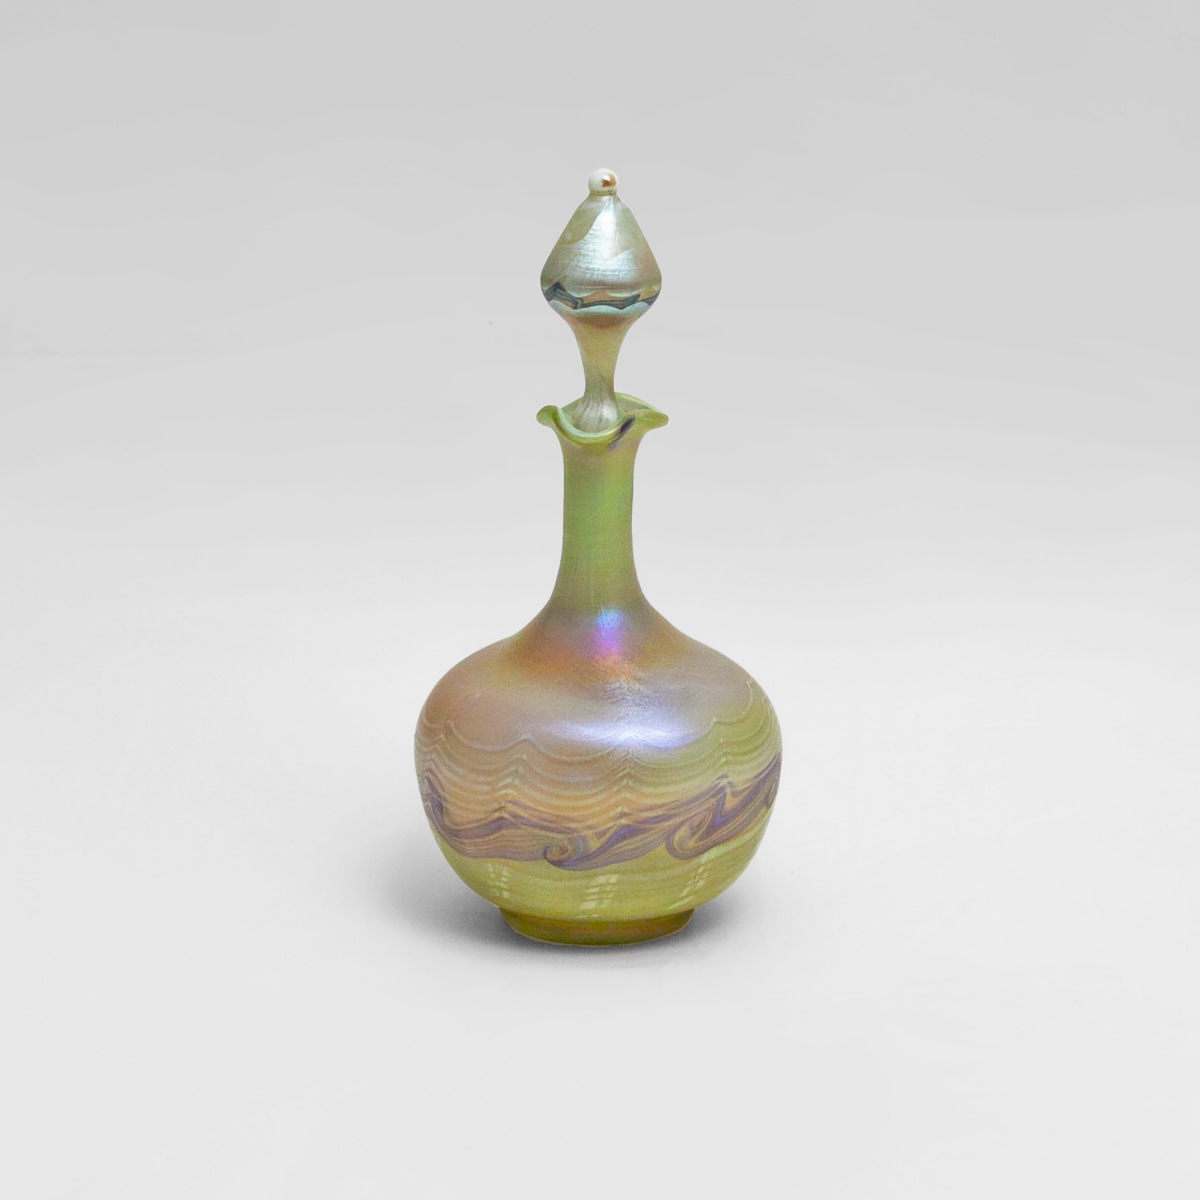 an iridescent perfume bottle by tiffany studios in pale greenish glass with matching swirling decoration on the body of the bottle and the teardrop shaped stopper